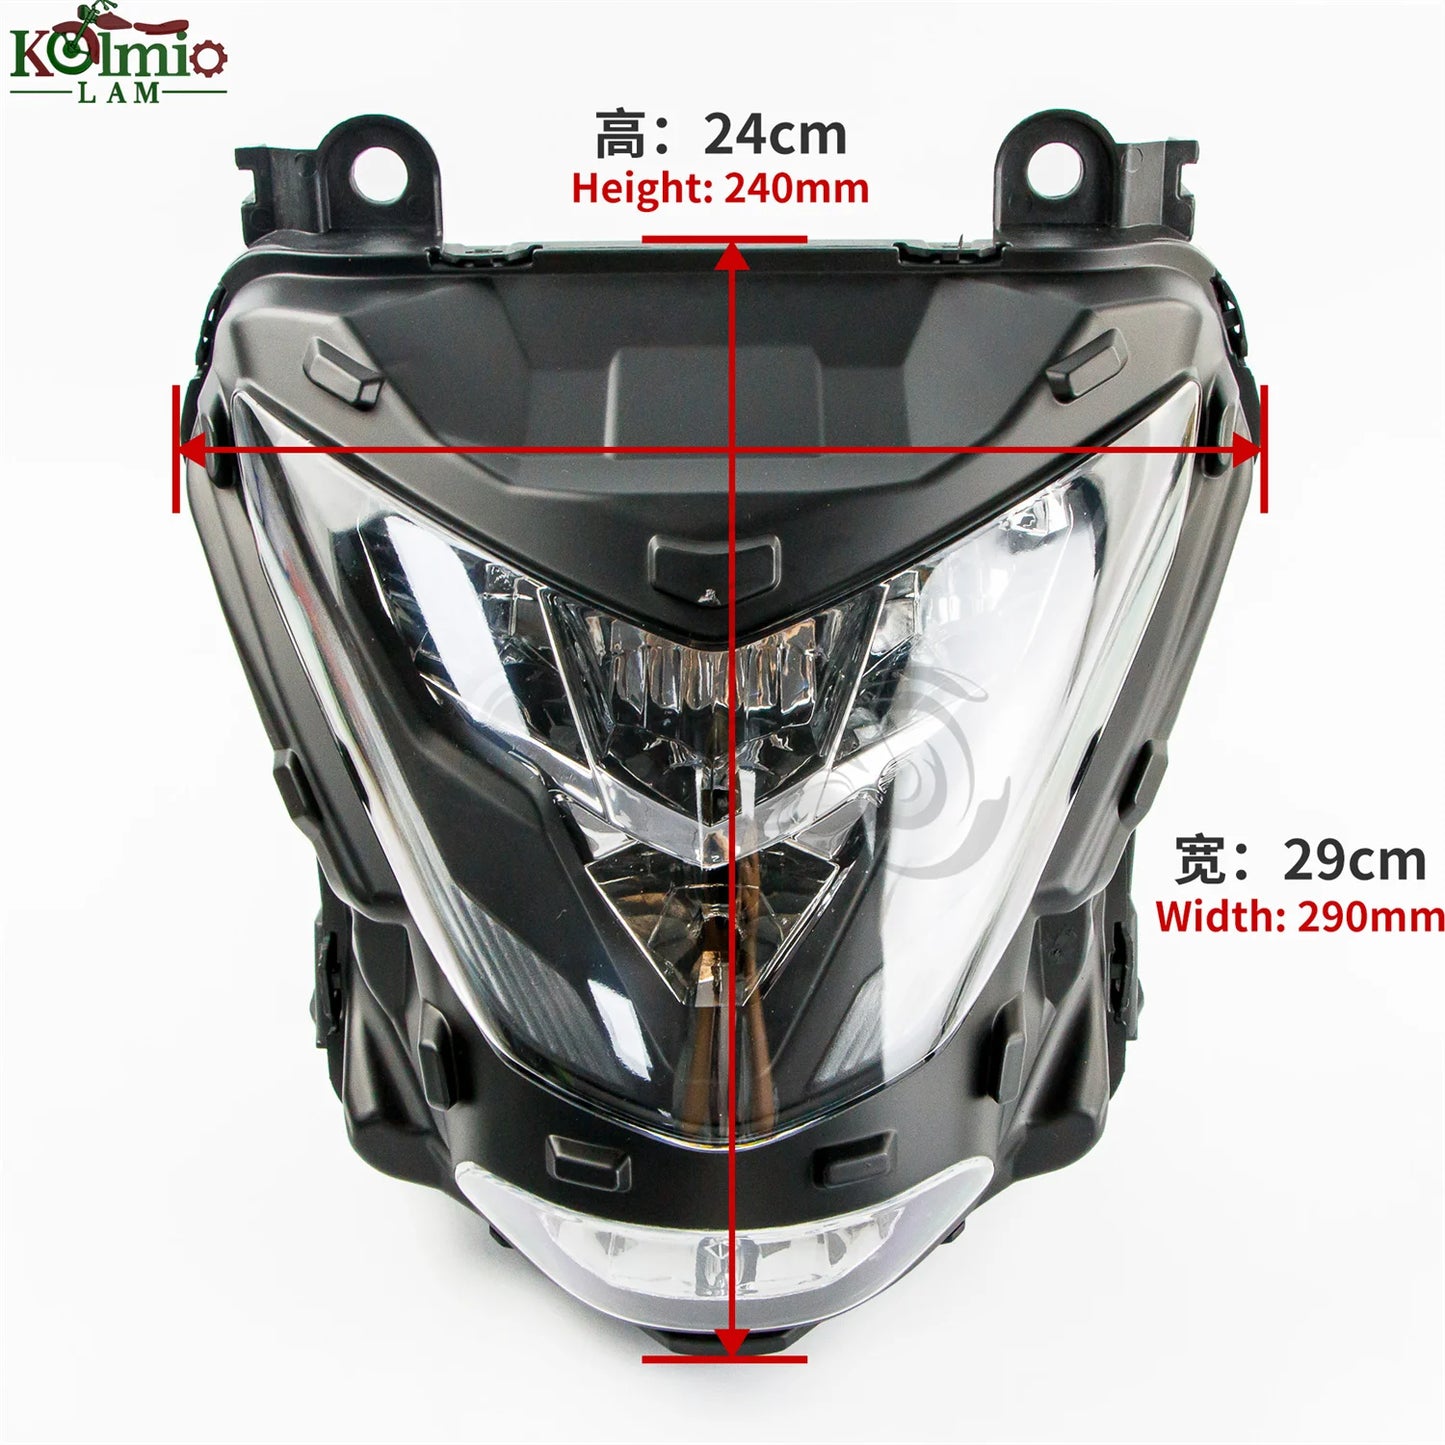 Fit For Honda 2021 - 2022 NC750X Motorcycle Accessories Led Headlight Assembly Headlamp Light NC750 X XD